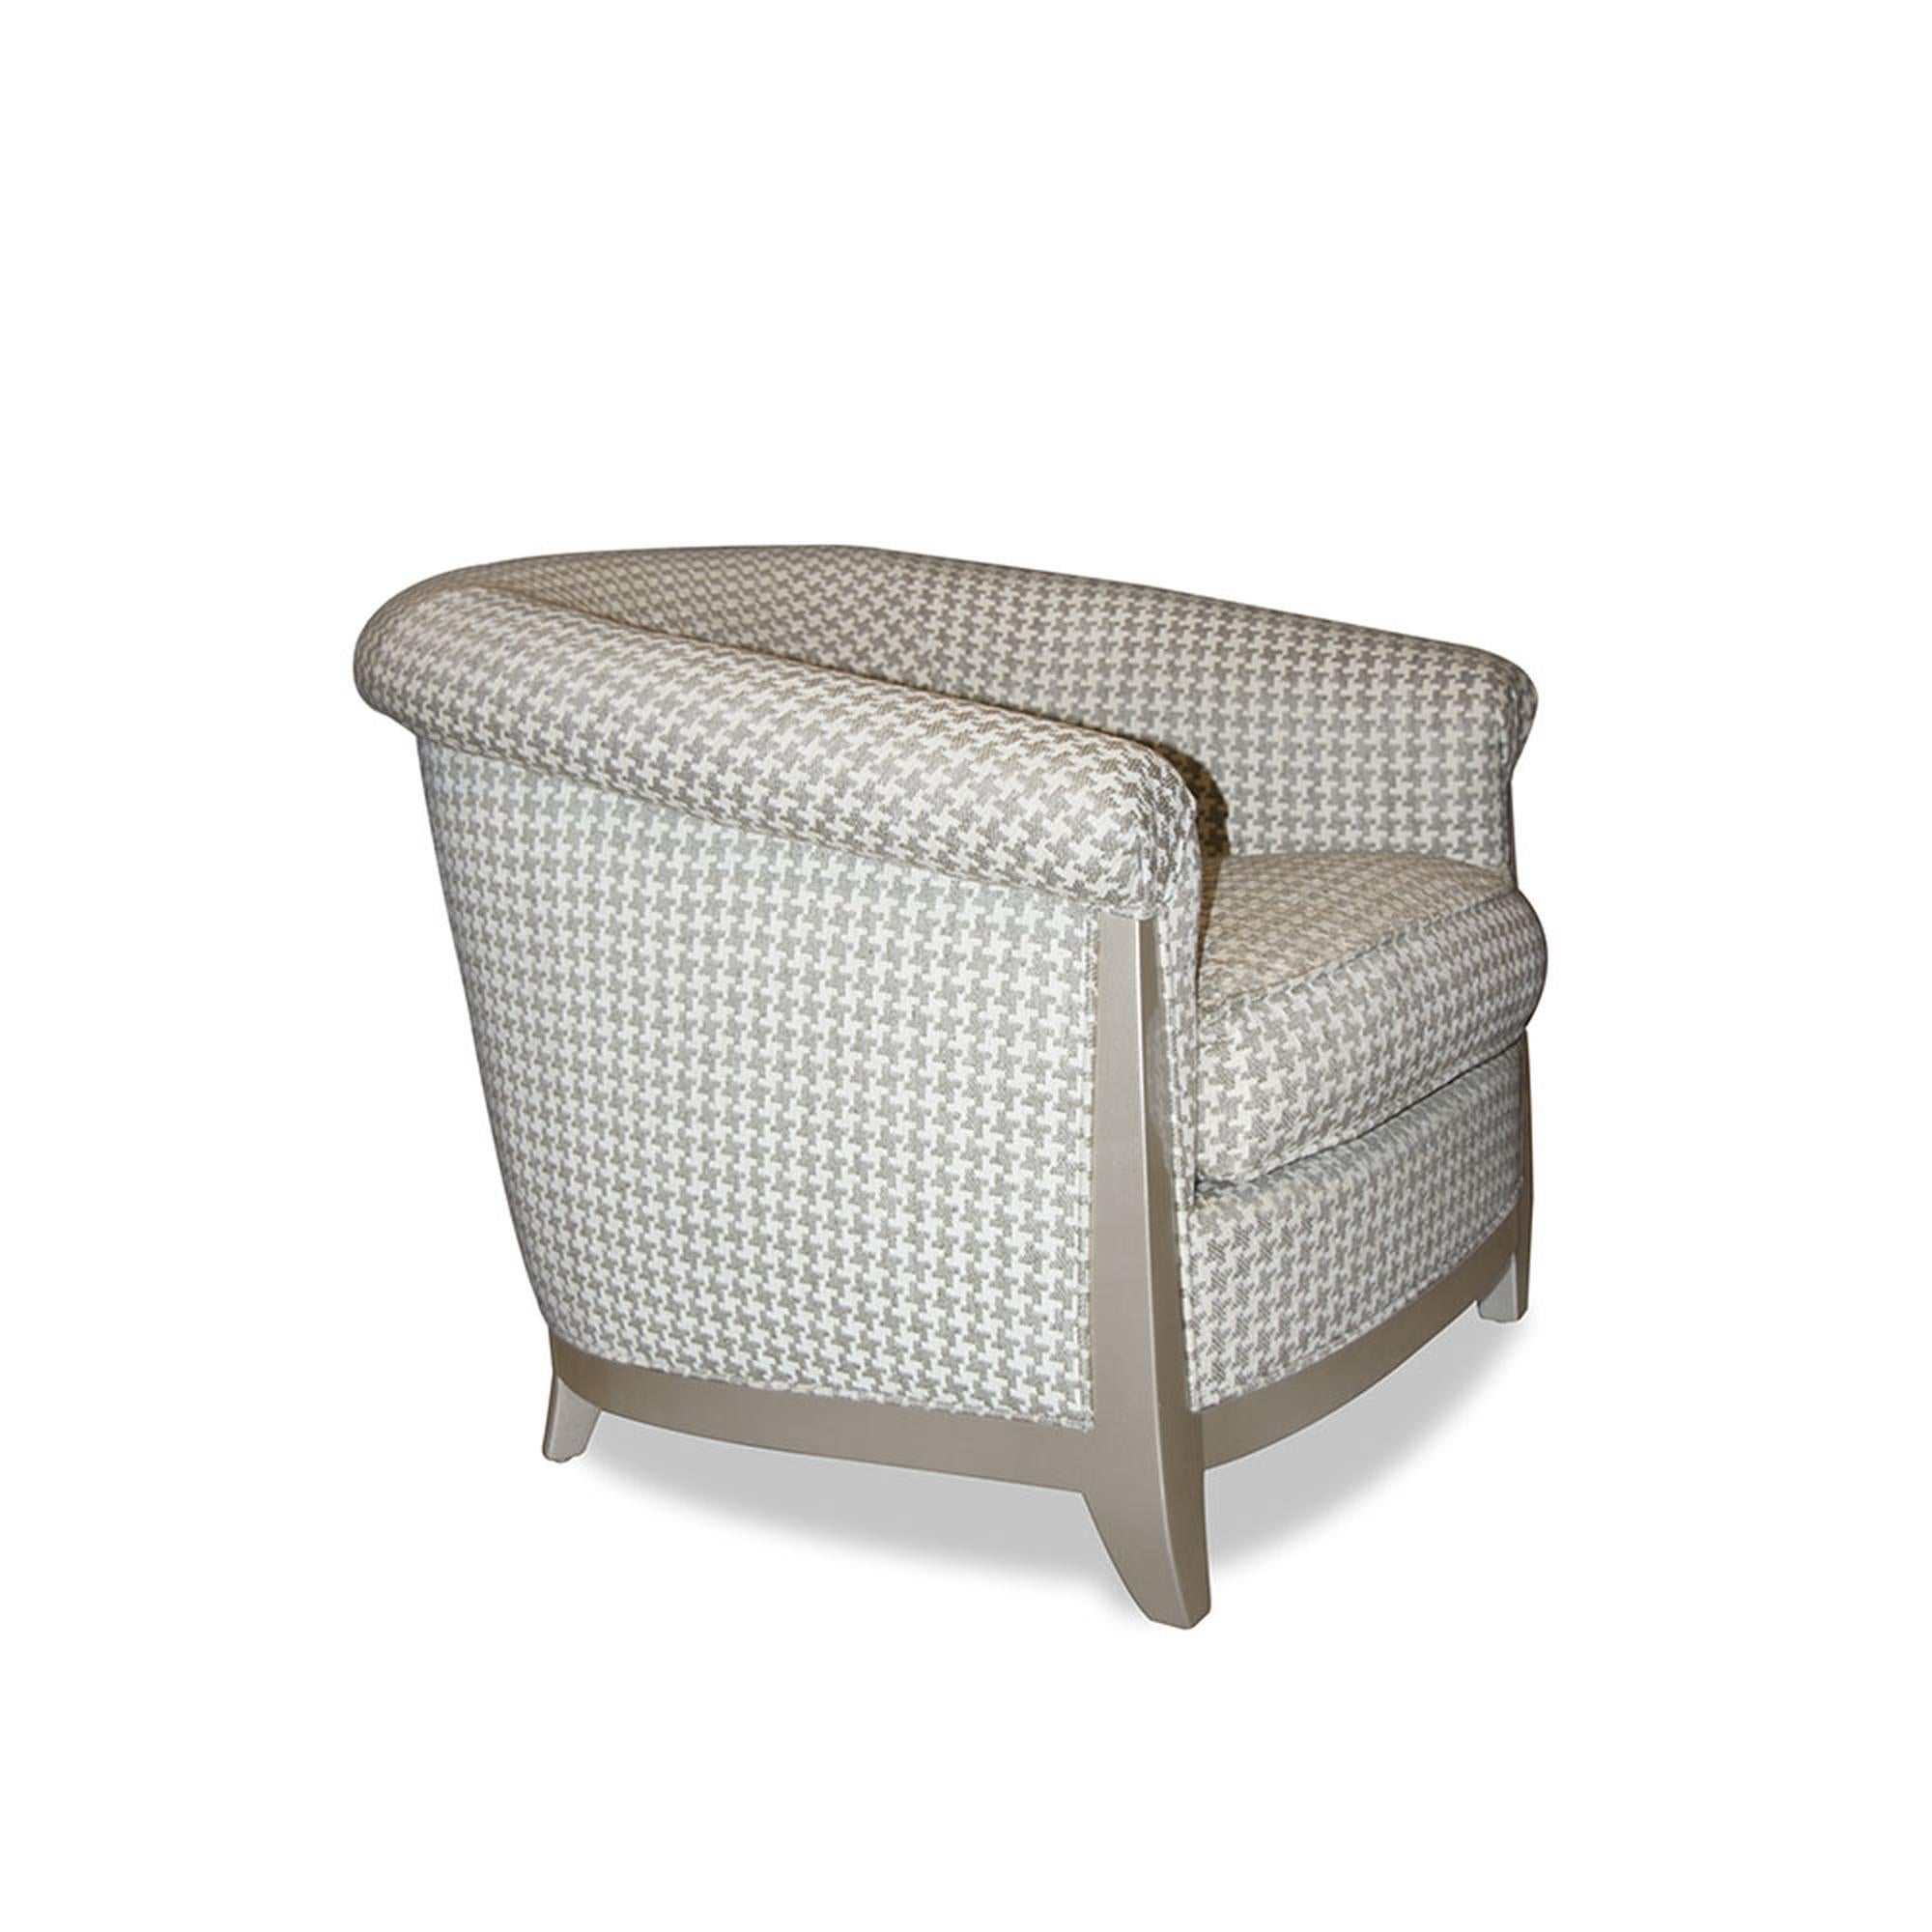 The Bel Air lounge chair II is a simply Classic piece, reminiscent of an Art Deco barrel chair. With a rich matte wood frame, this cozy chair is upholstered beautifully on all sides. The down wrapped foam cushion allows the user to sink in and relax